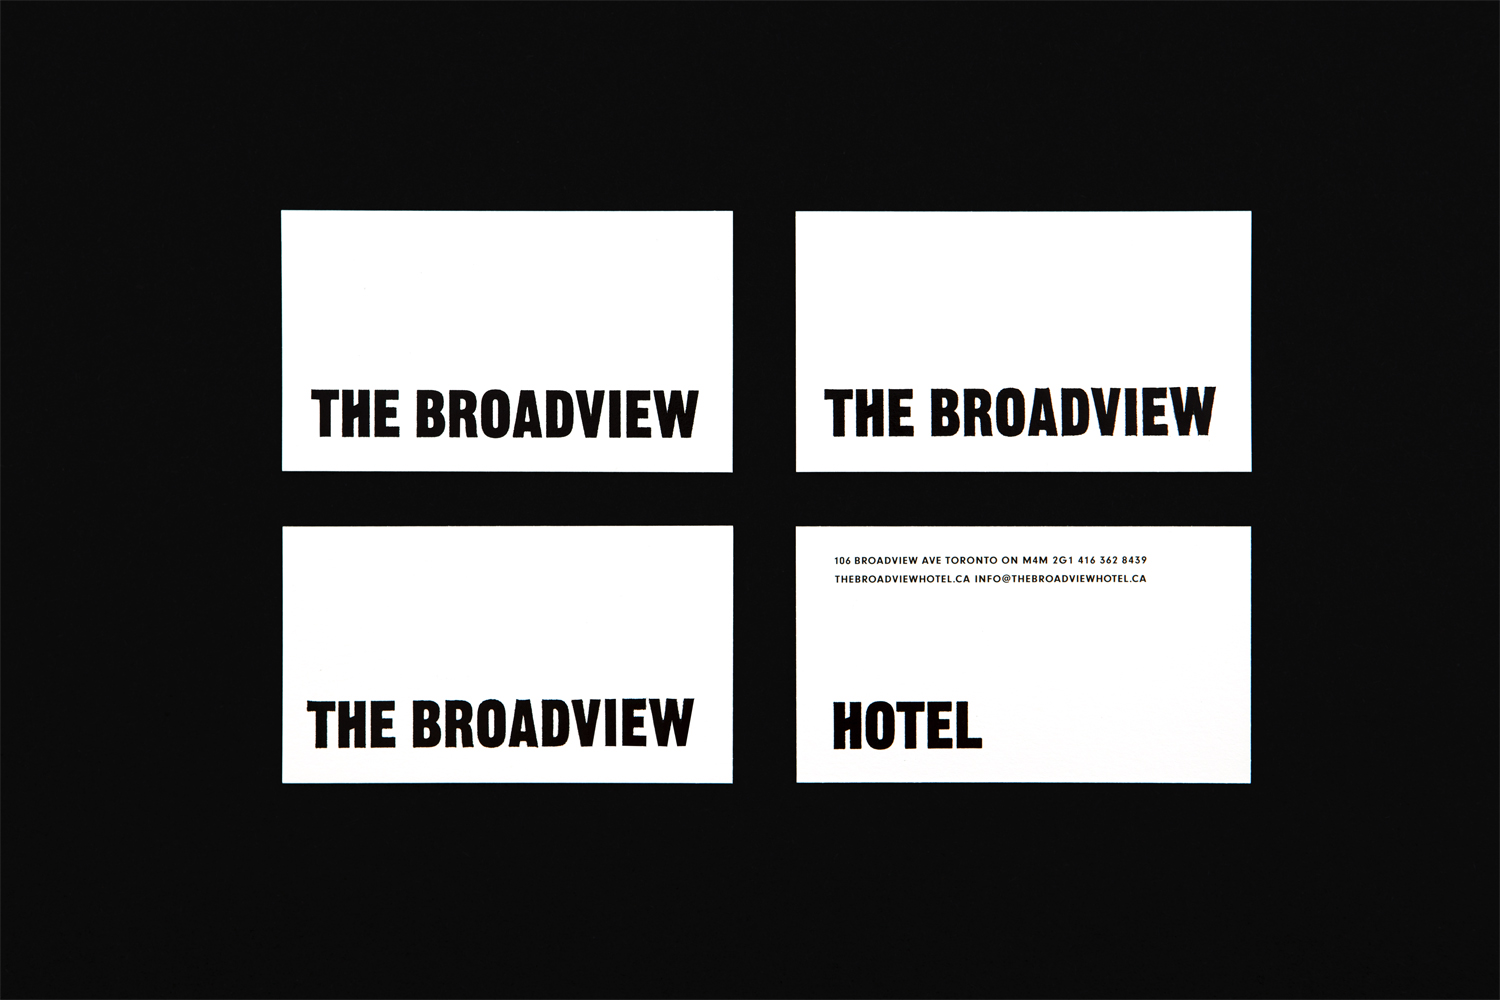 The Best Business Cards Designs of 2017 – The Broadview Hotel by Blok, Canada